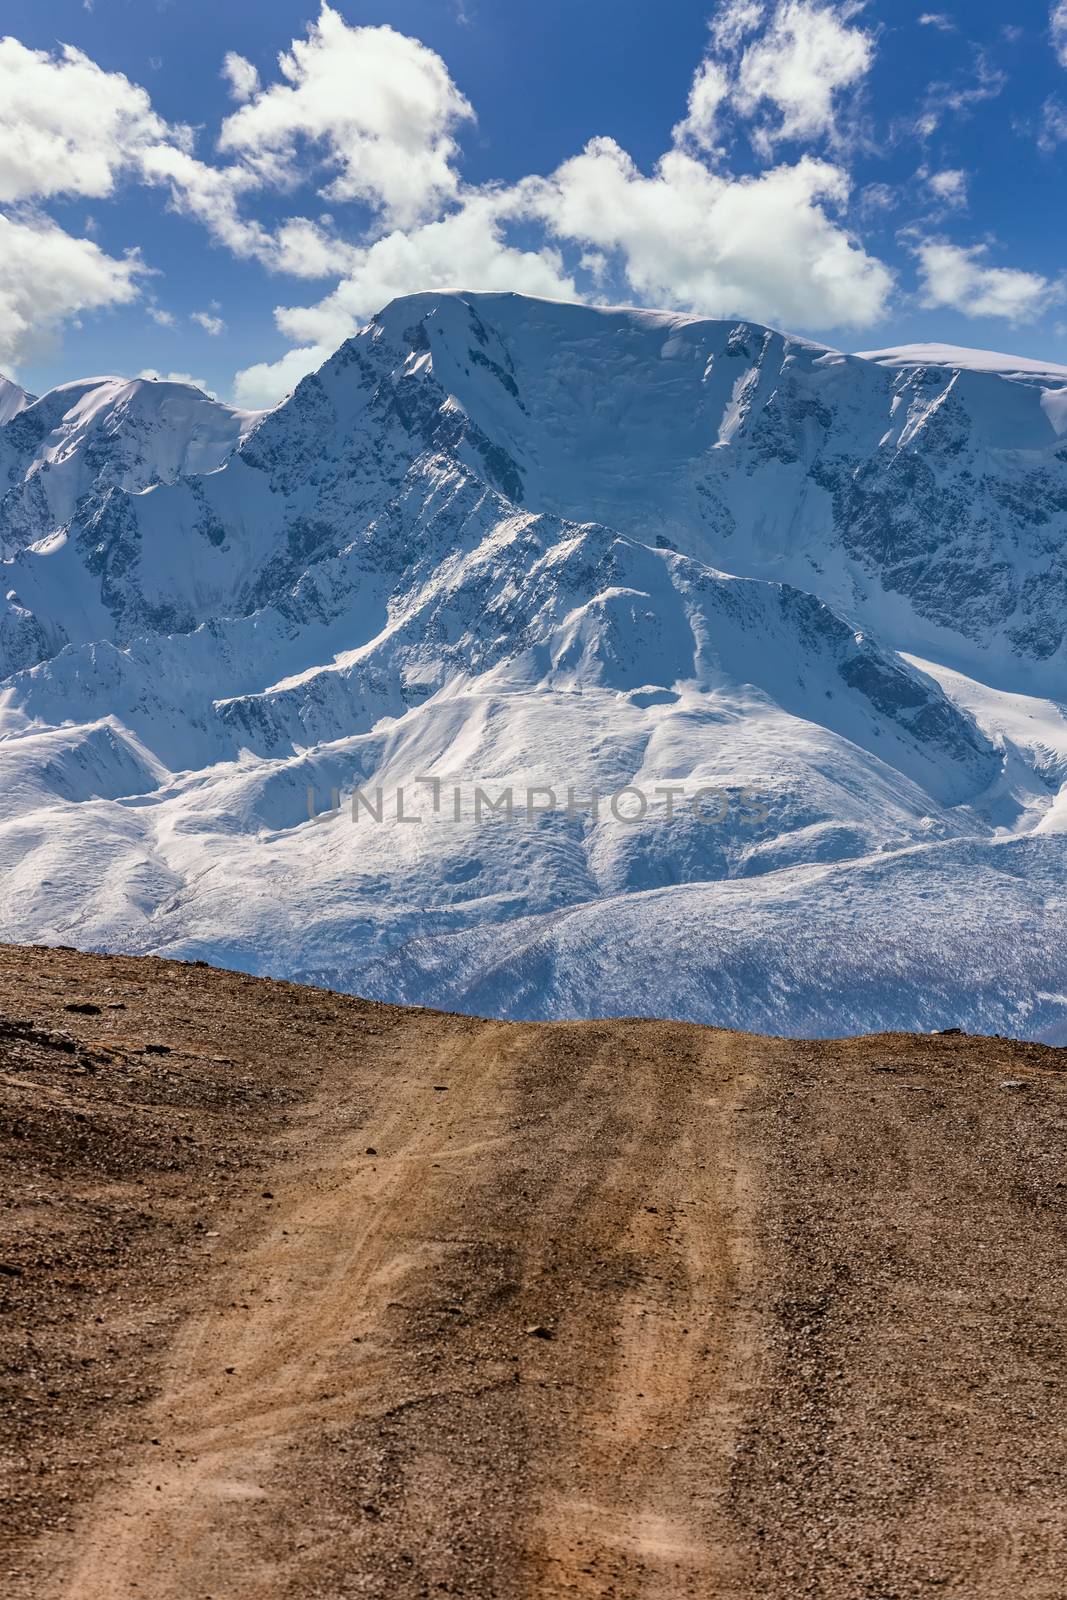 Portrait size landscape of a highland road leading to the snowy mountains of The North Chuyskiy mountain range. Beautiful blue cloudy sky as a background. Altai mountains, Siberia, Russia.